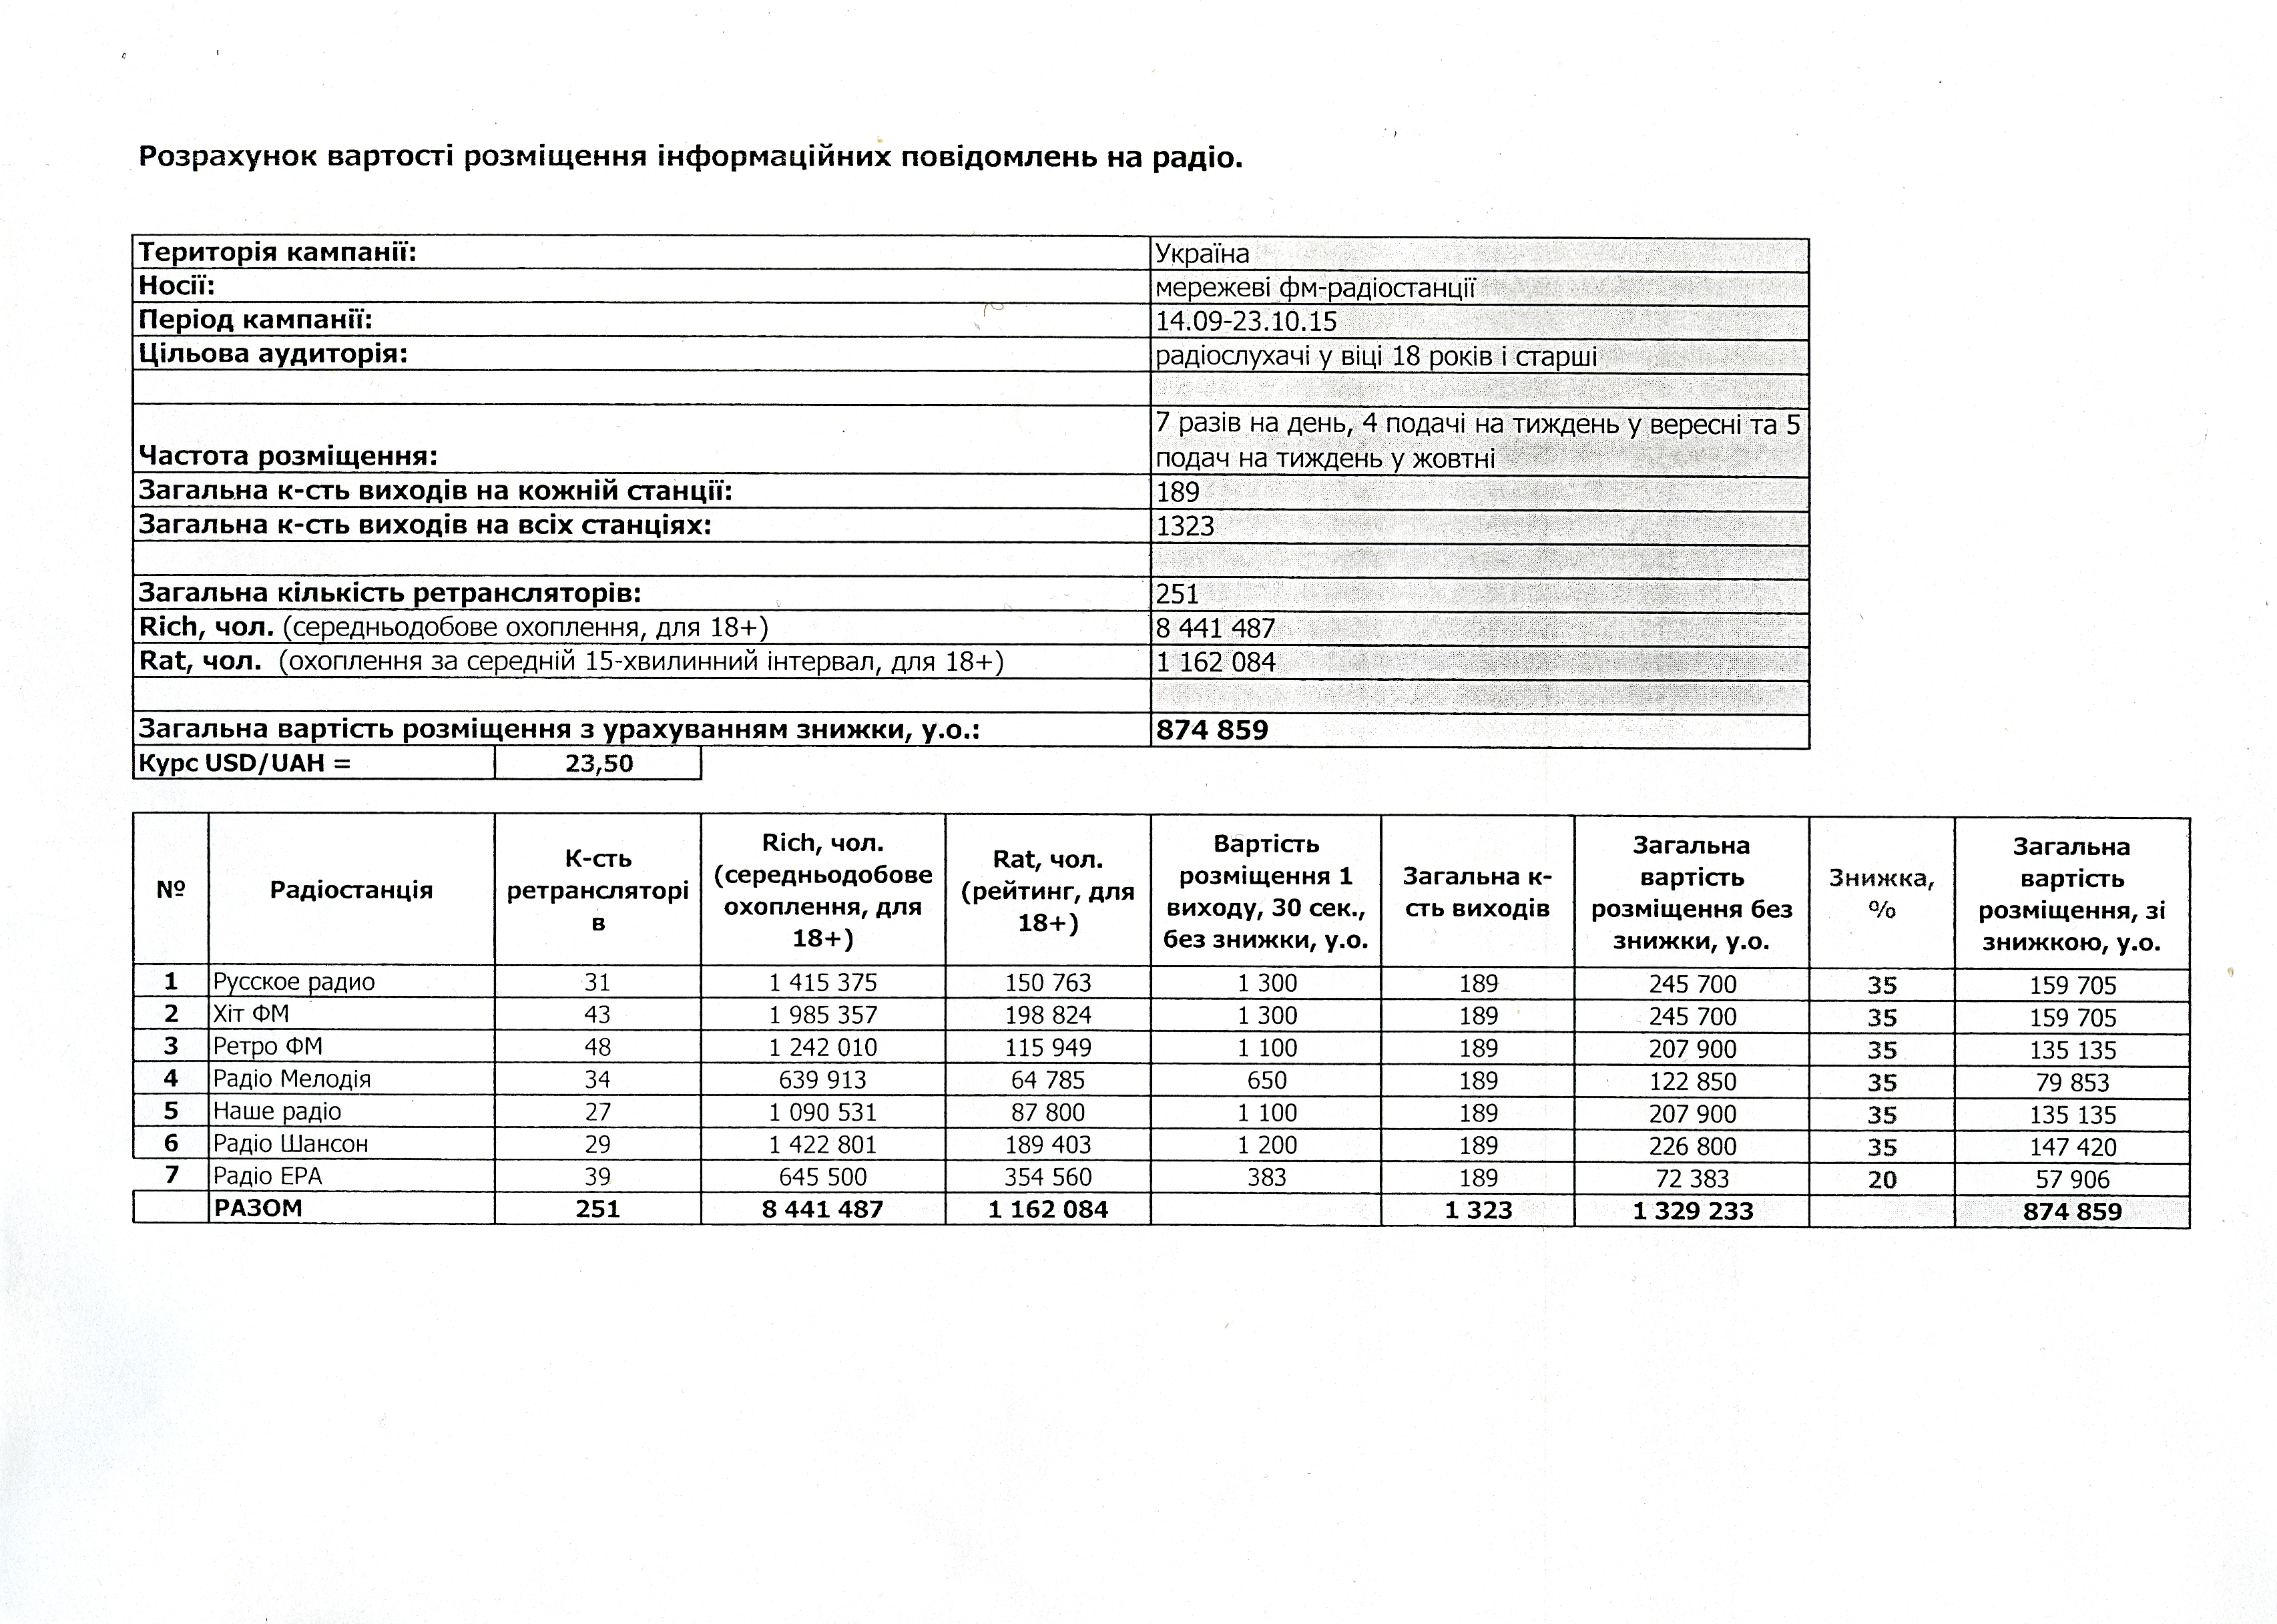 This document, obtained by the Kyiv Post, allegedly detalizes how the $874,859 were spent on ads that masked as news on radio stations during the 2015 local elections.